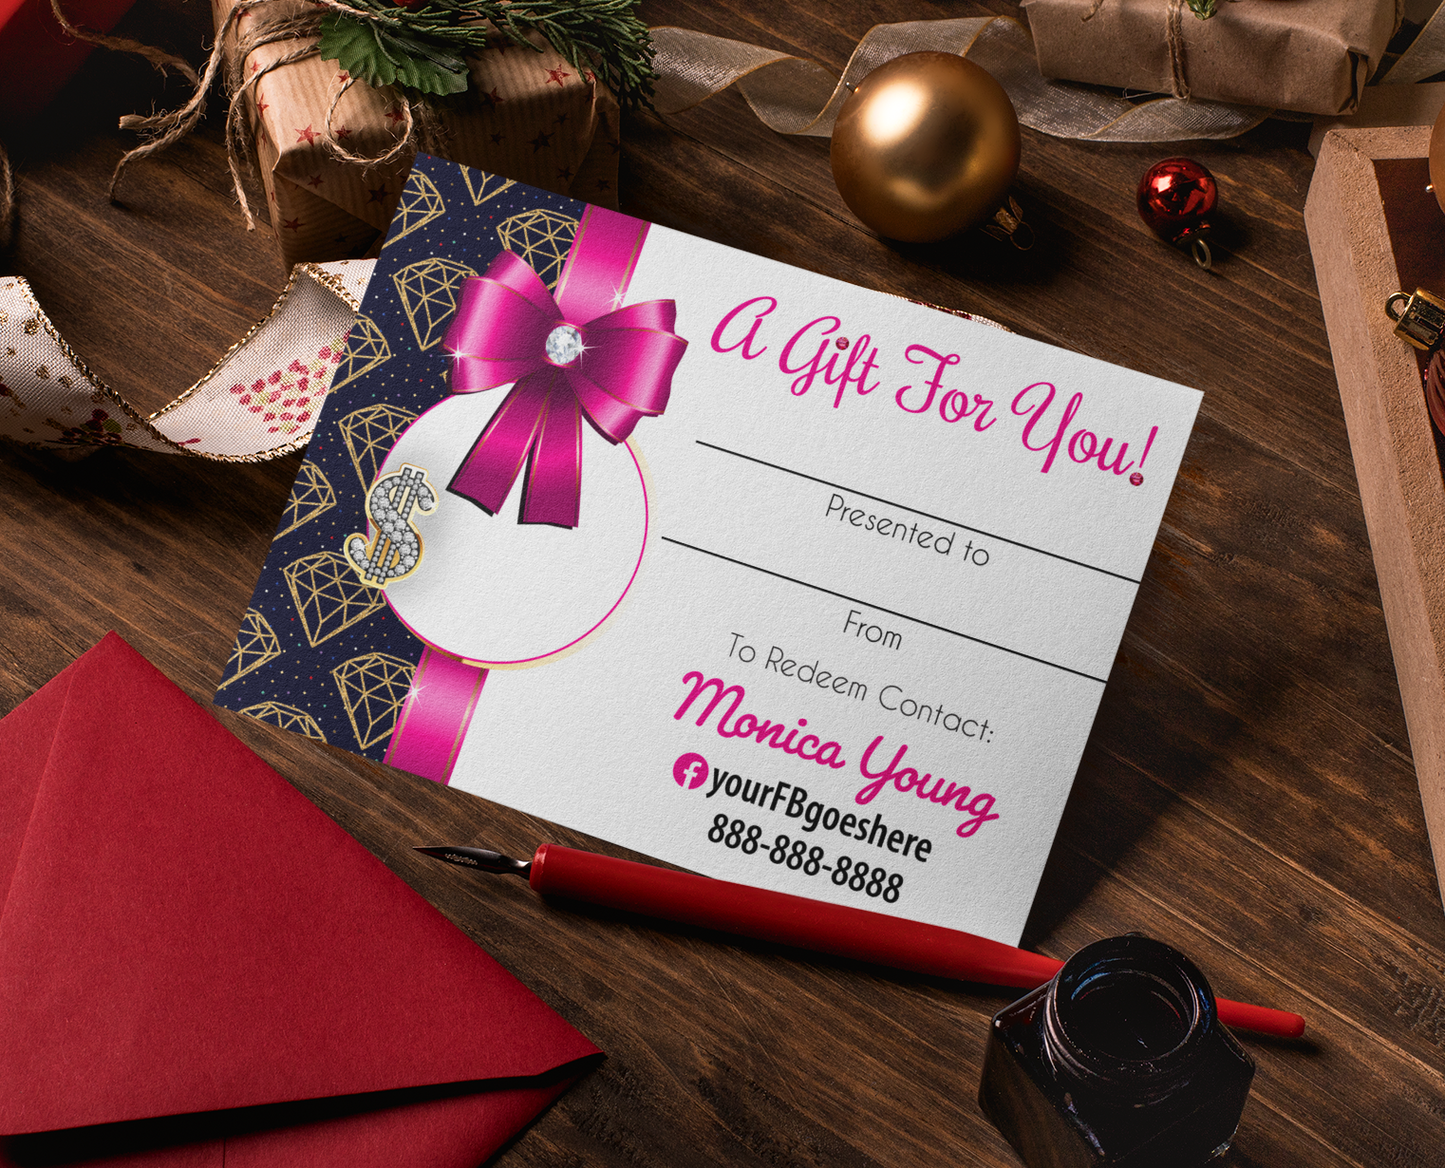 100 4x6 Personalized Gift Certificates